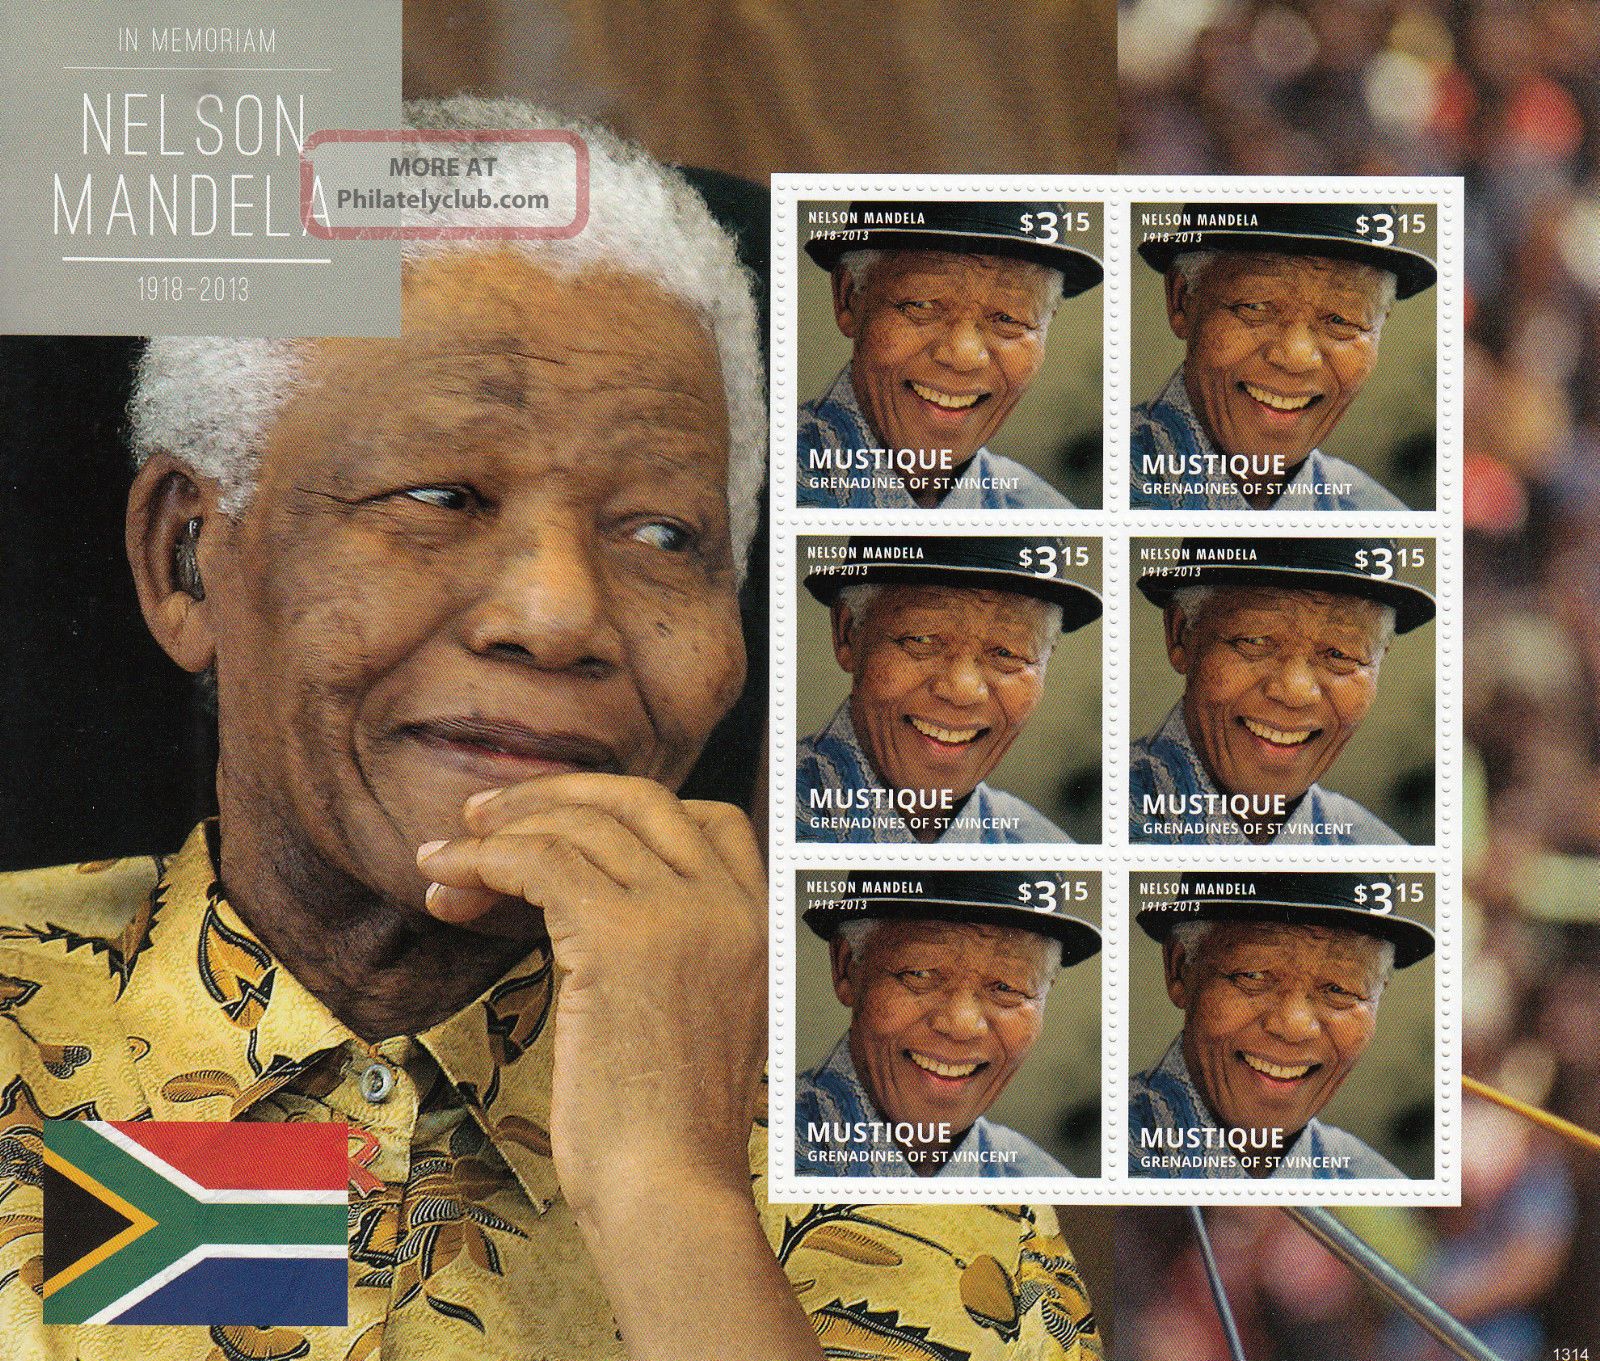 Mustique Grenadines St Vincent 2013 Nelson Mandela In Memoriam Ii 6v M/s Anc Topical Stamps photo